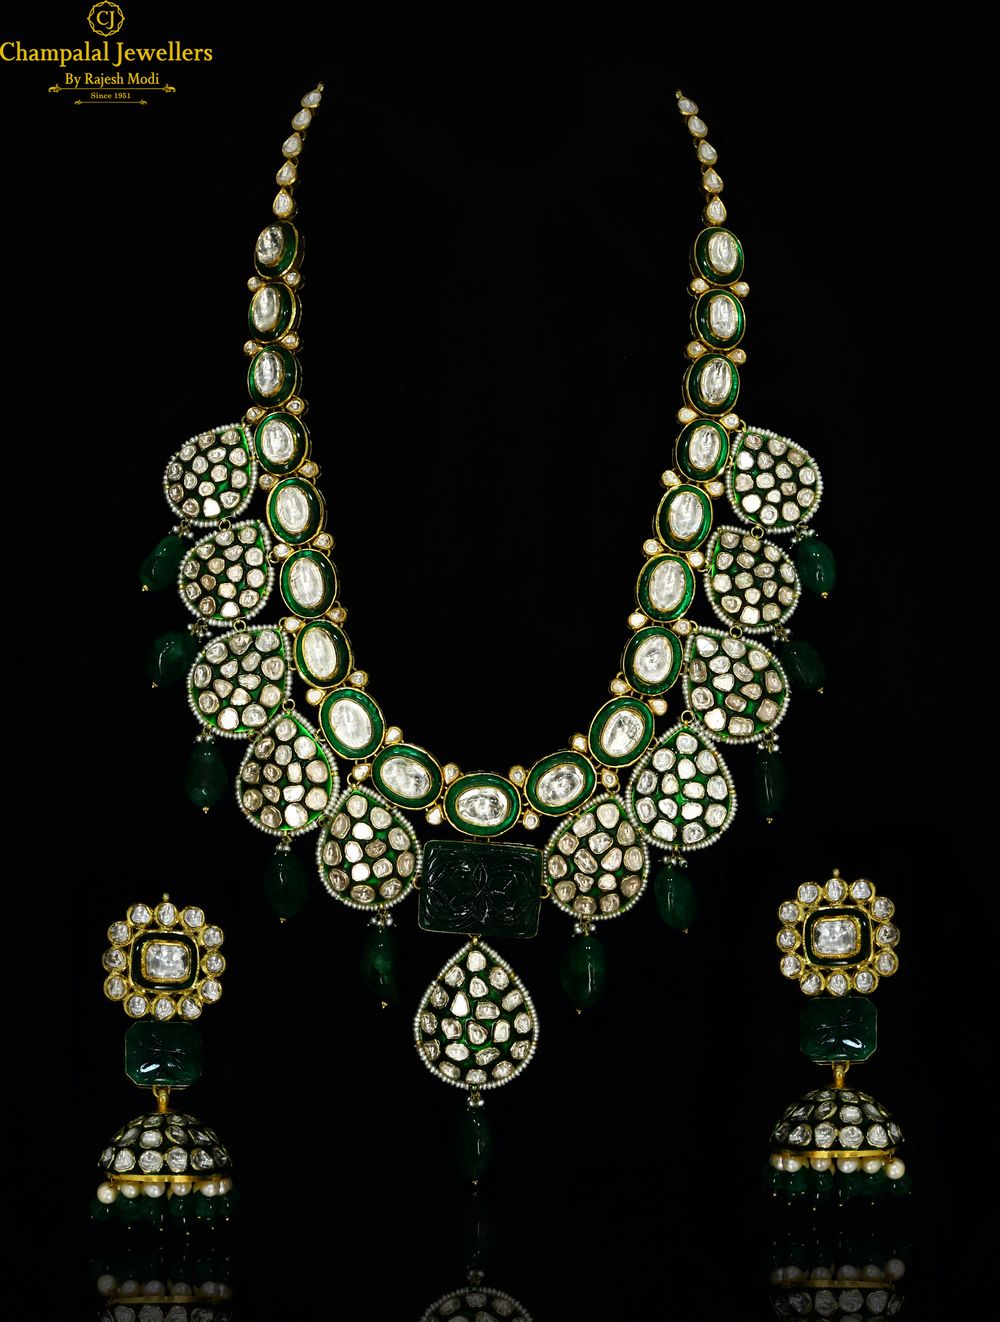 Photo From Majestic Greens - Polki Jewellery Collection by Champalal Jewellers by Rajesh Modi - By Champalal Jewellers by Rajesh Modi